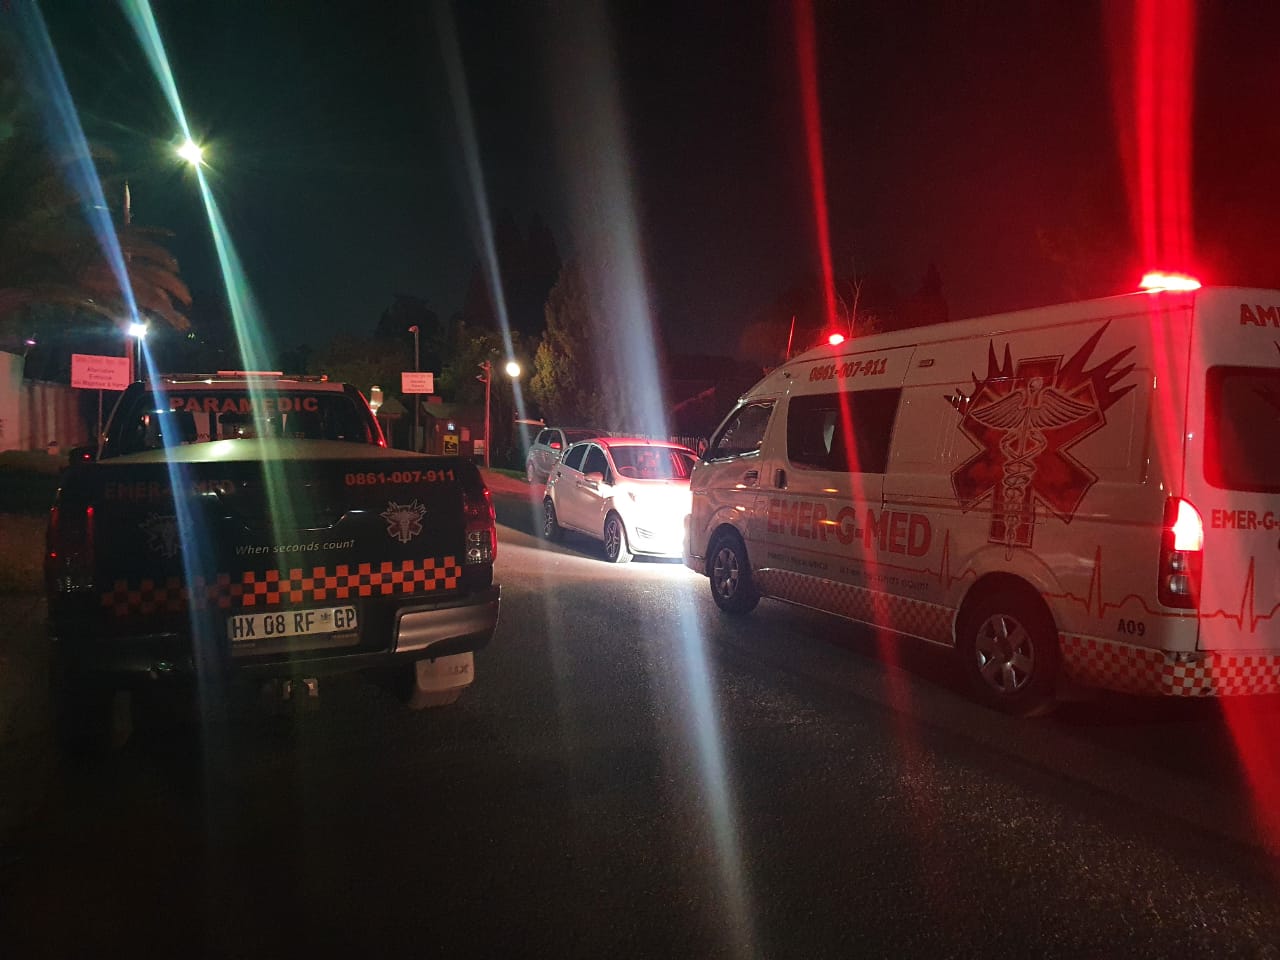 One injured in an armed robbery incident in Edenvale